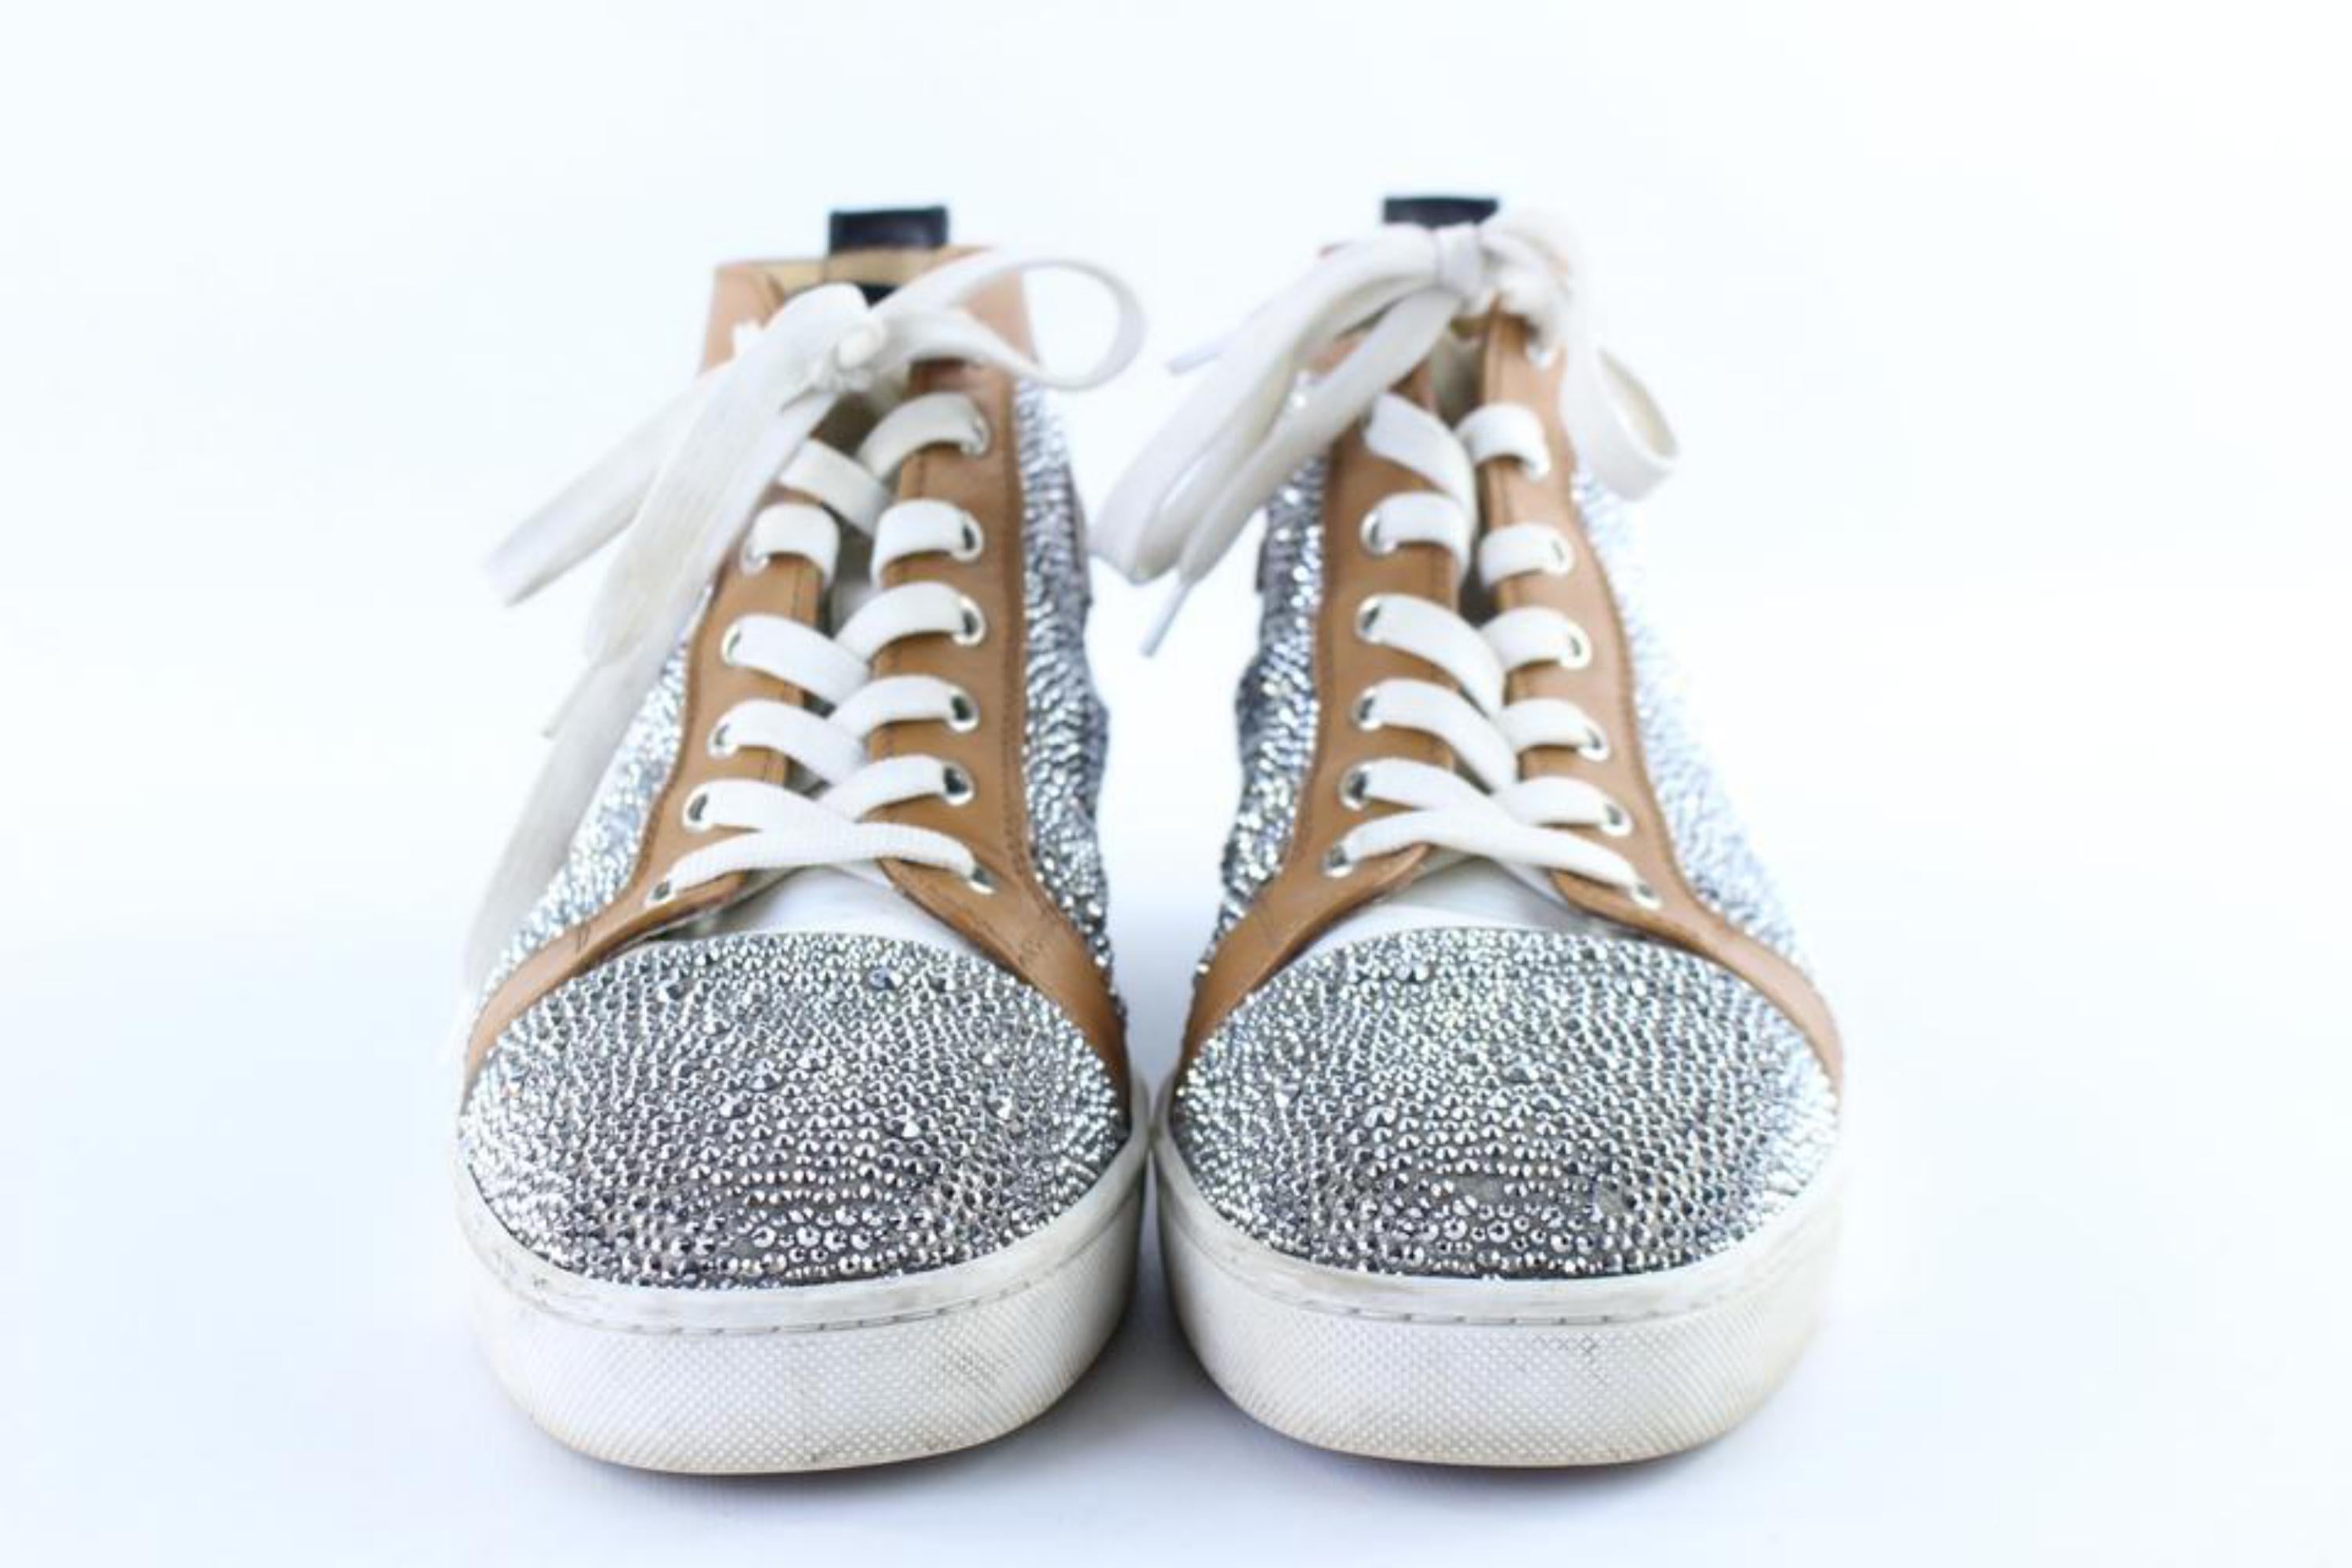 Christian Louboutin Crystal Strass Louis High Top Sneaker 10clb1222 Boots/Bootie For Sale 2